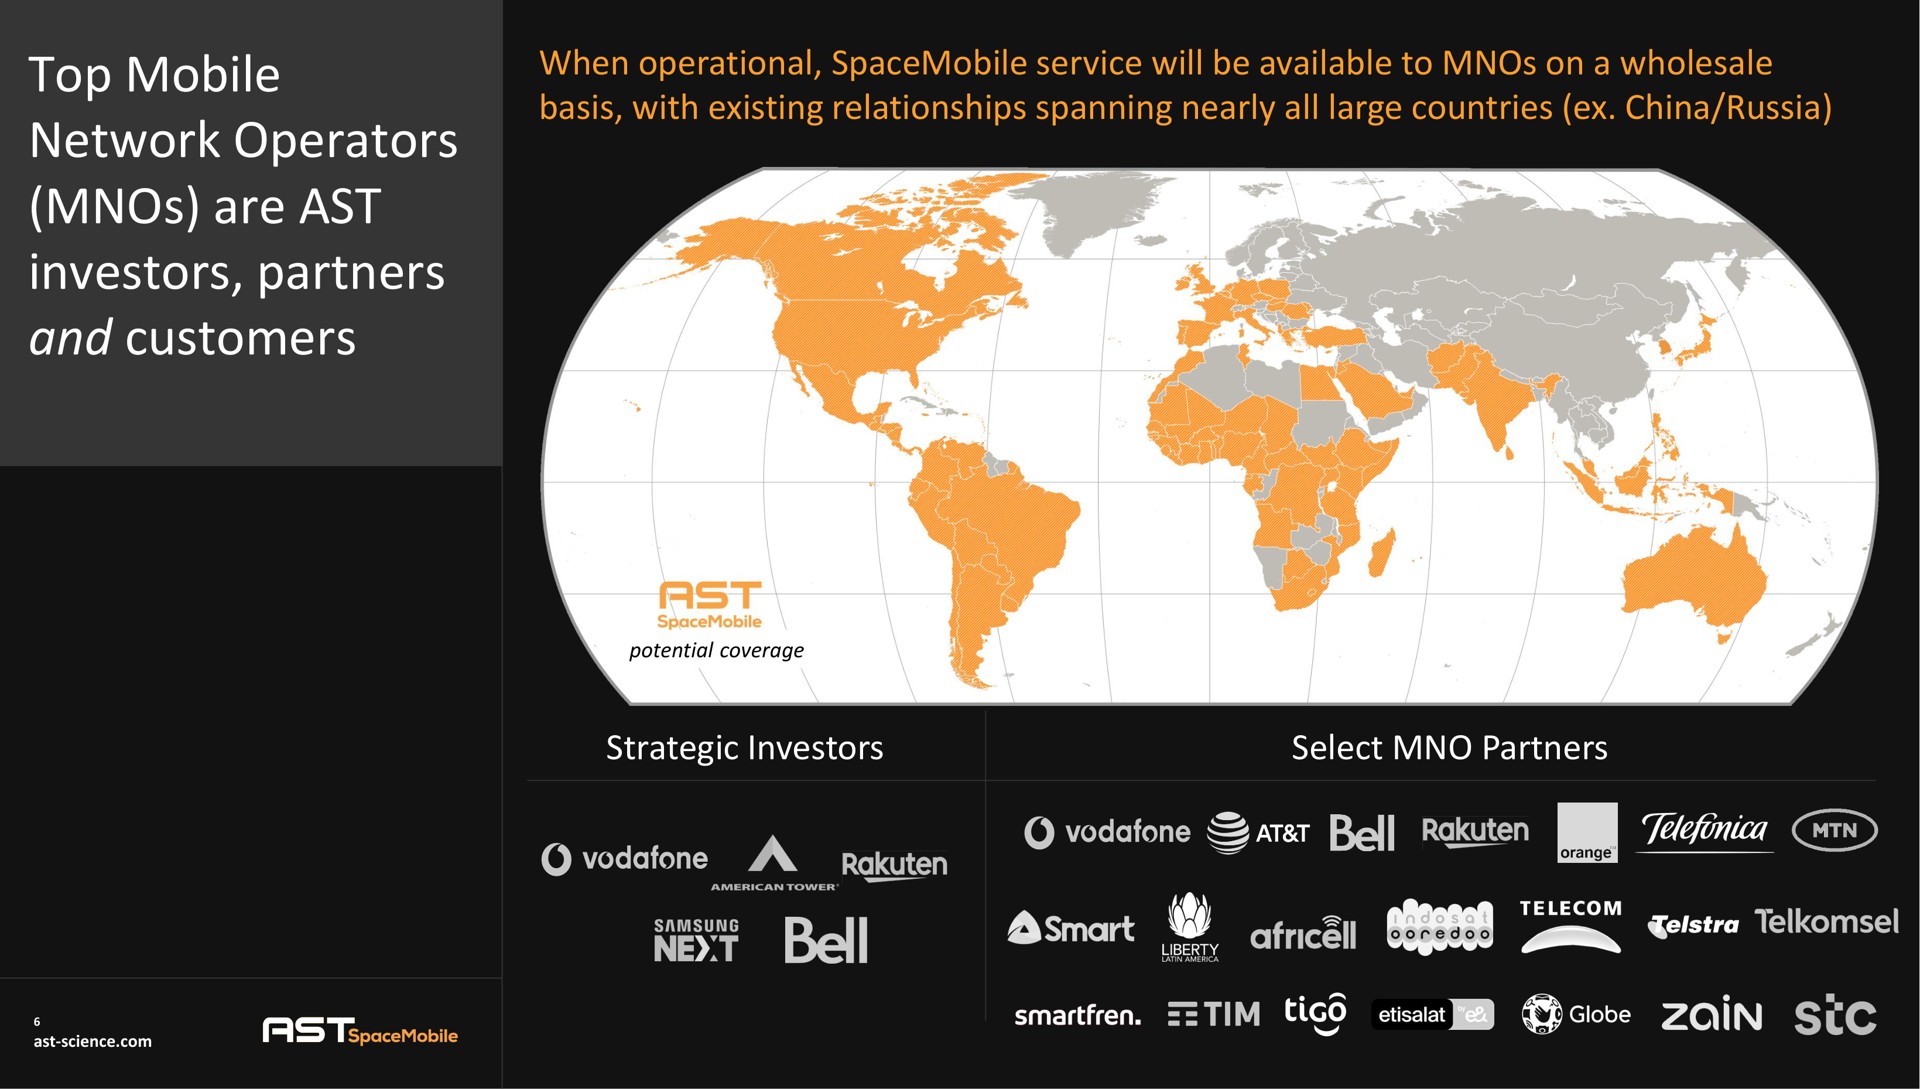 when operational service will be available to on a wholesale basis with existing relationships spanning nearly all large countries china russia strategic investors select partners top mobile network operators are ast investors partners and customers smart nee | AST SpaceMobile